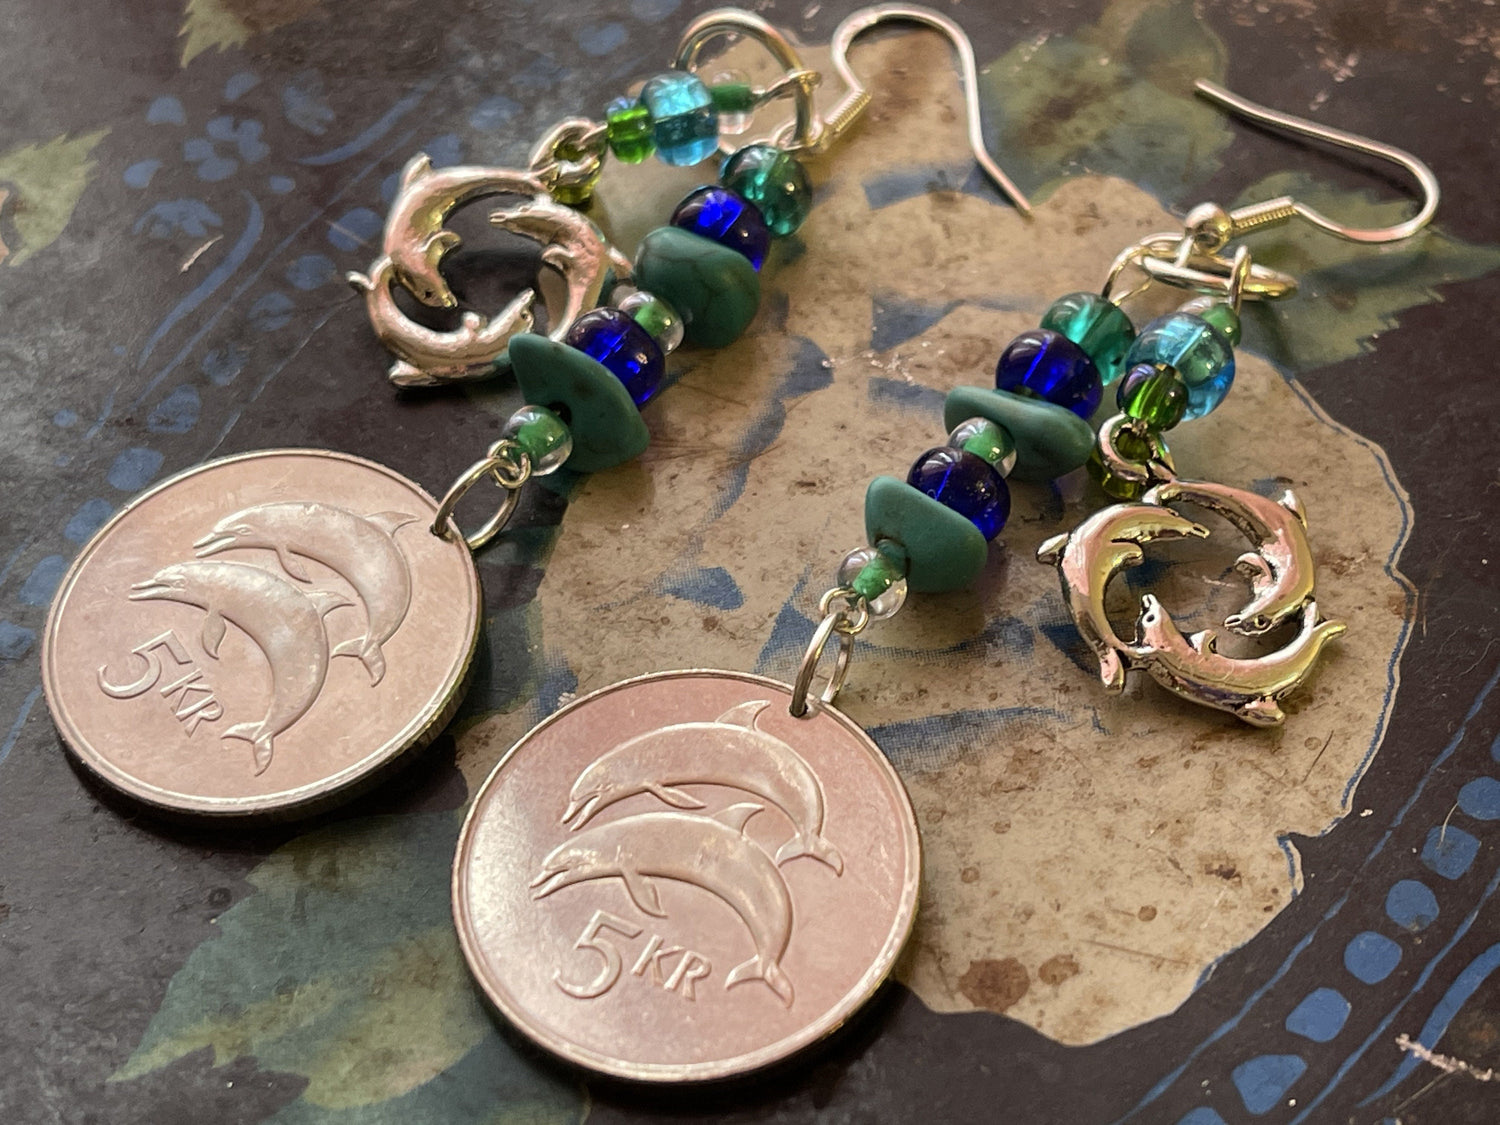 Dolphin coins dangle earrings - Earth Day Sterling Silver plated designer jewelry - Three dolphins sea life charm - blue glass turquoise gem